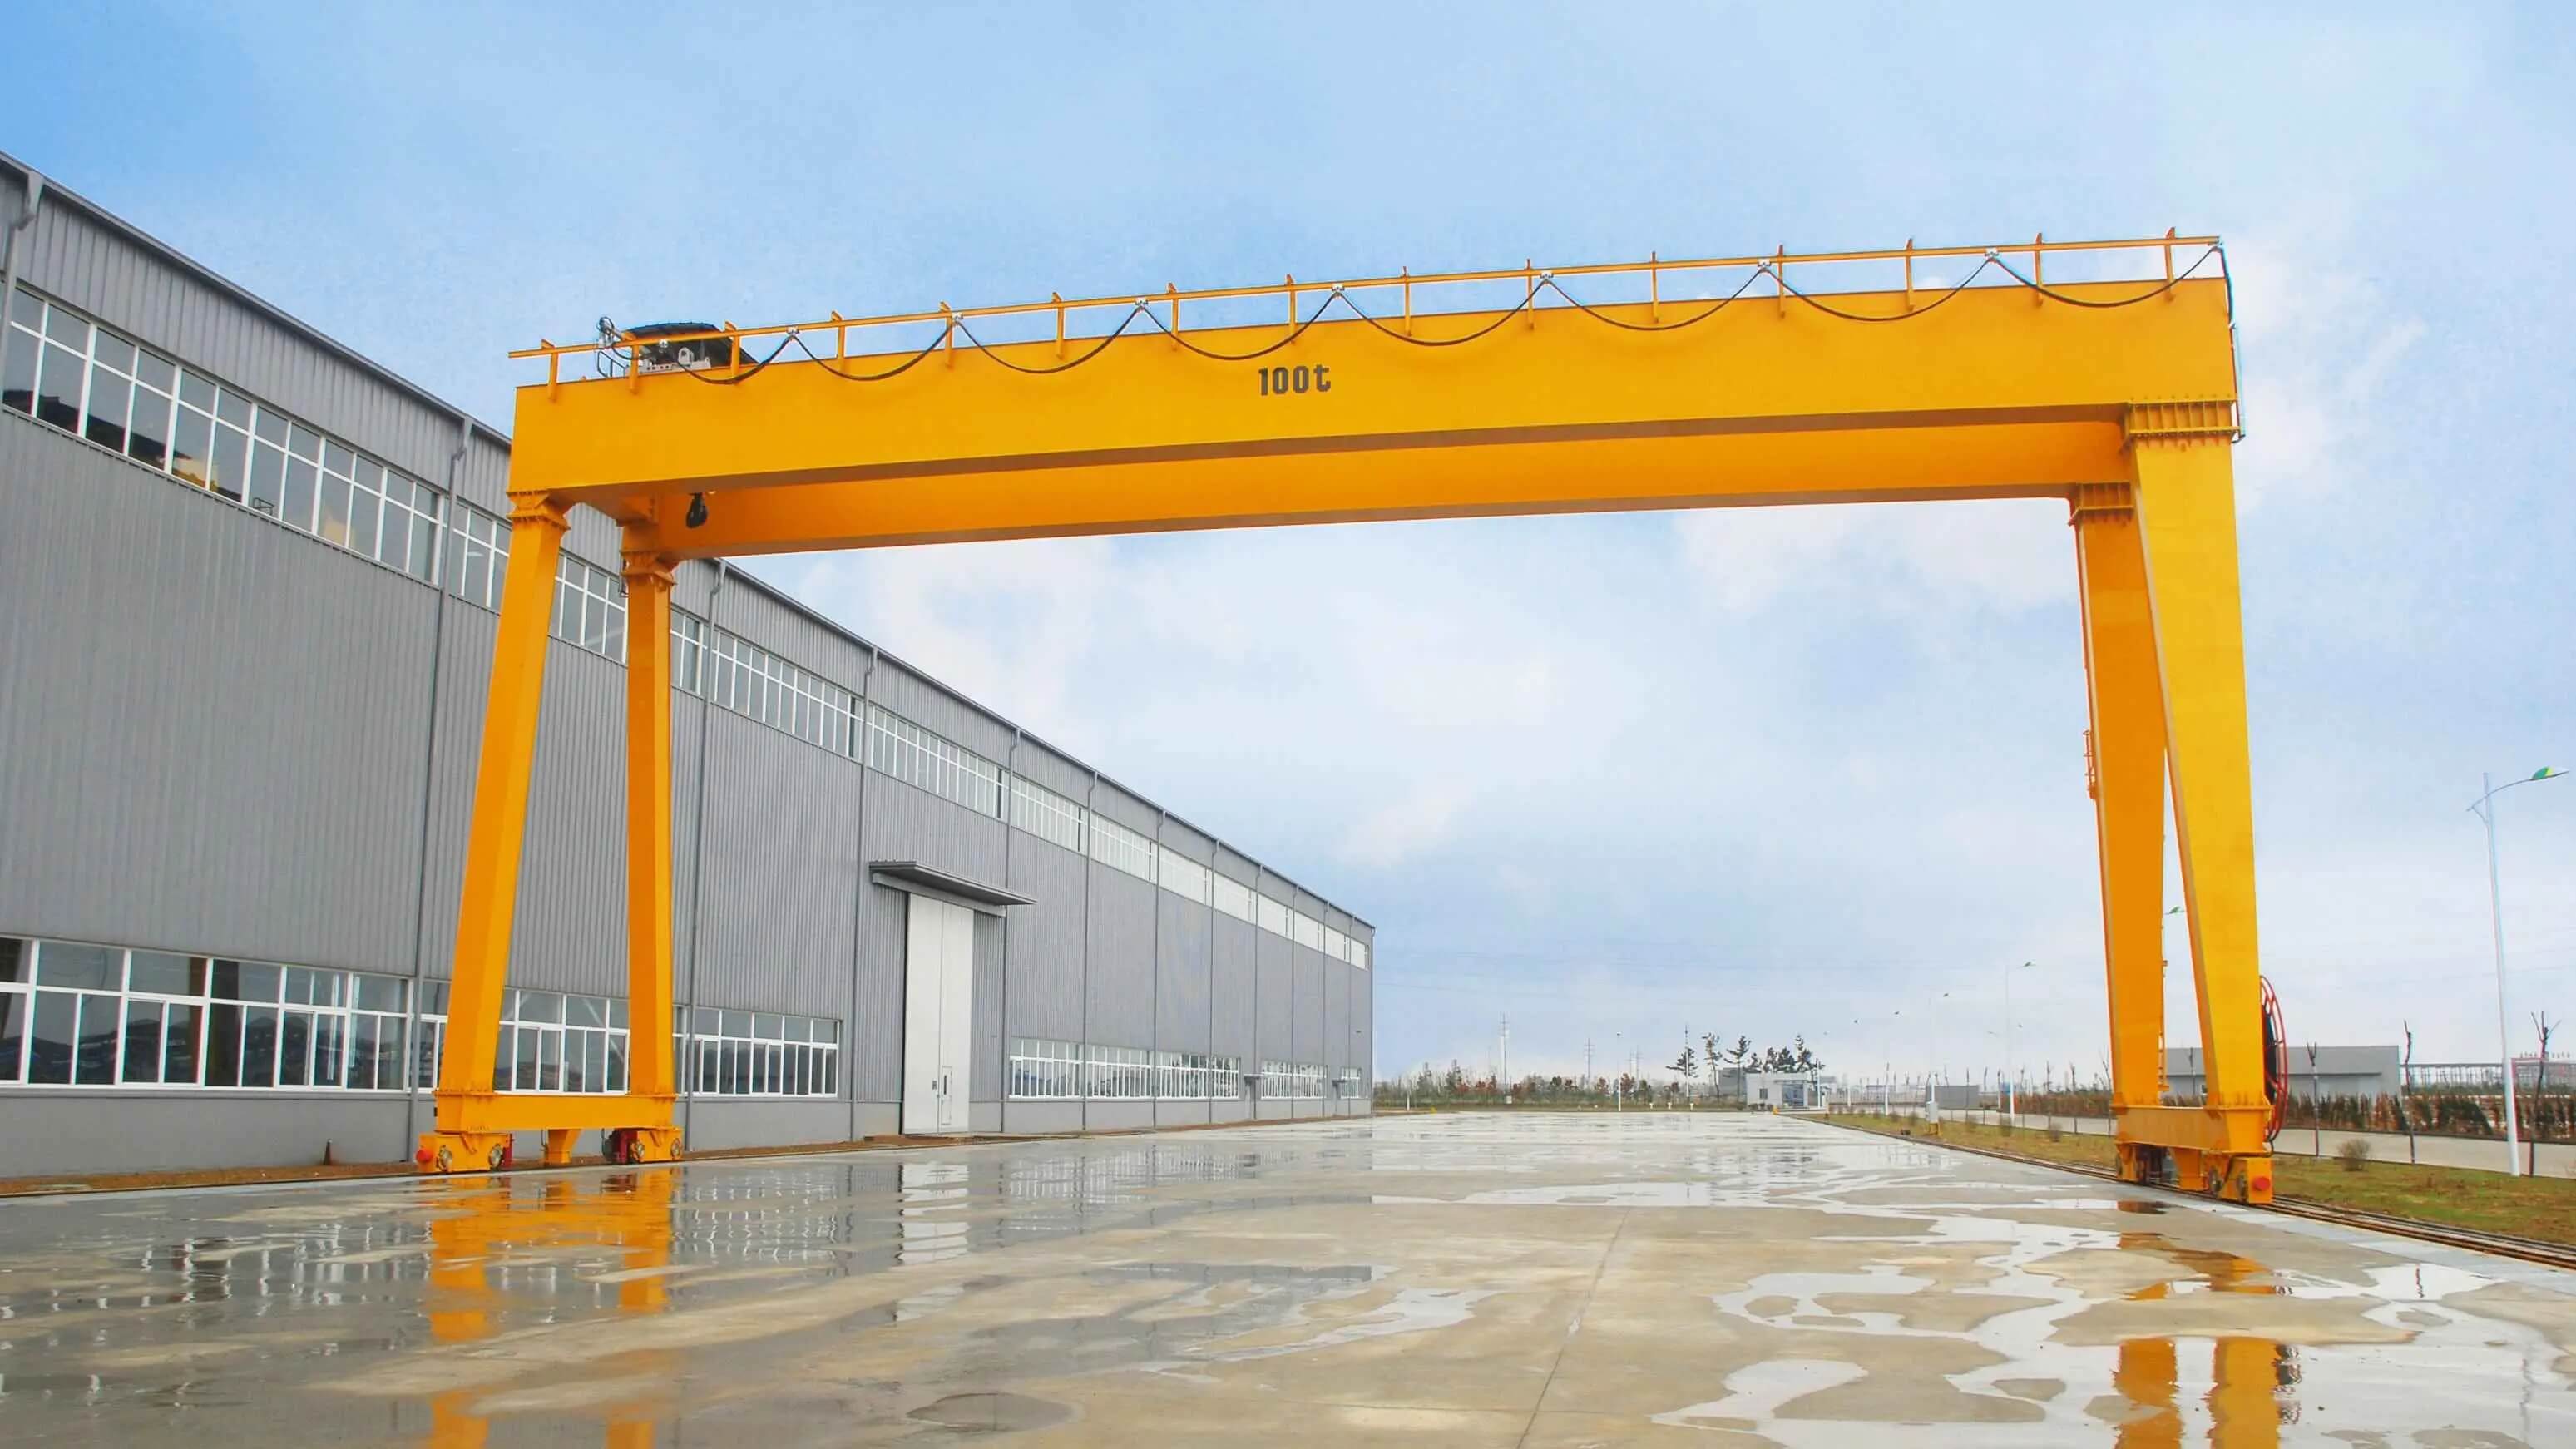 Yellow gantry crane with double girder, in front of a building